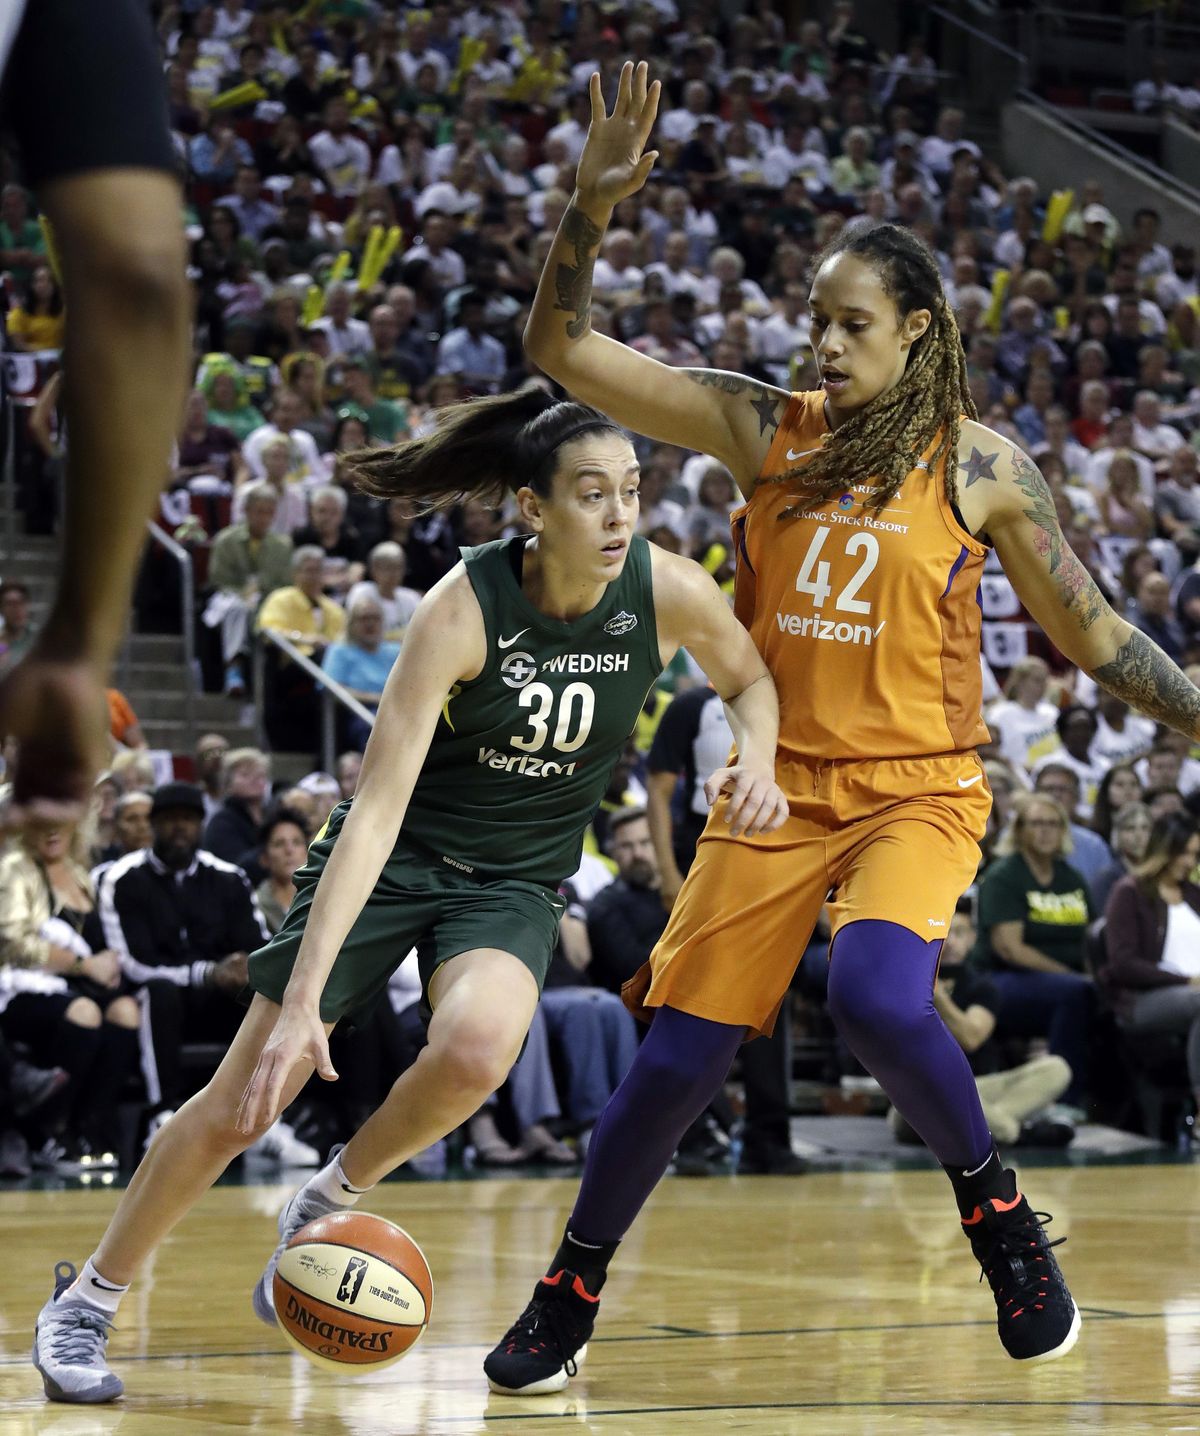 Seattle’s Breanna Stewart tries to drive past Phoenix’s Brittney Griner in the first half Tuesday in Seattle. (Elaine Thompson / AP)